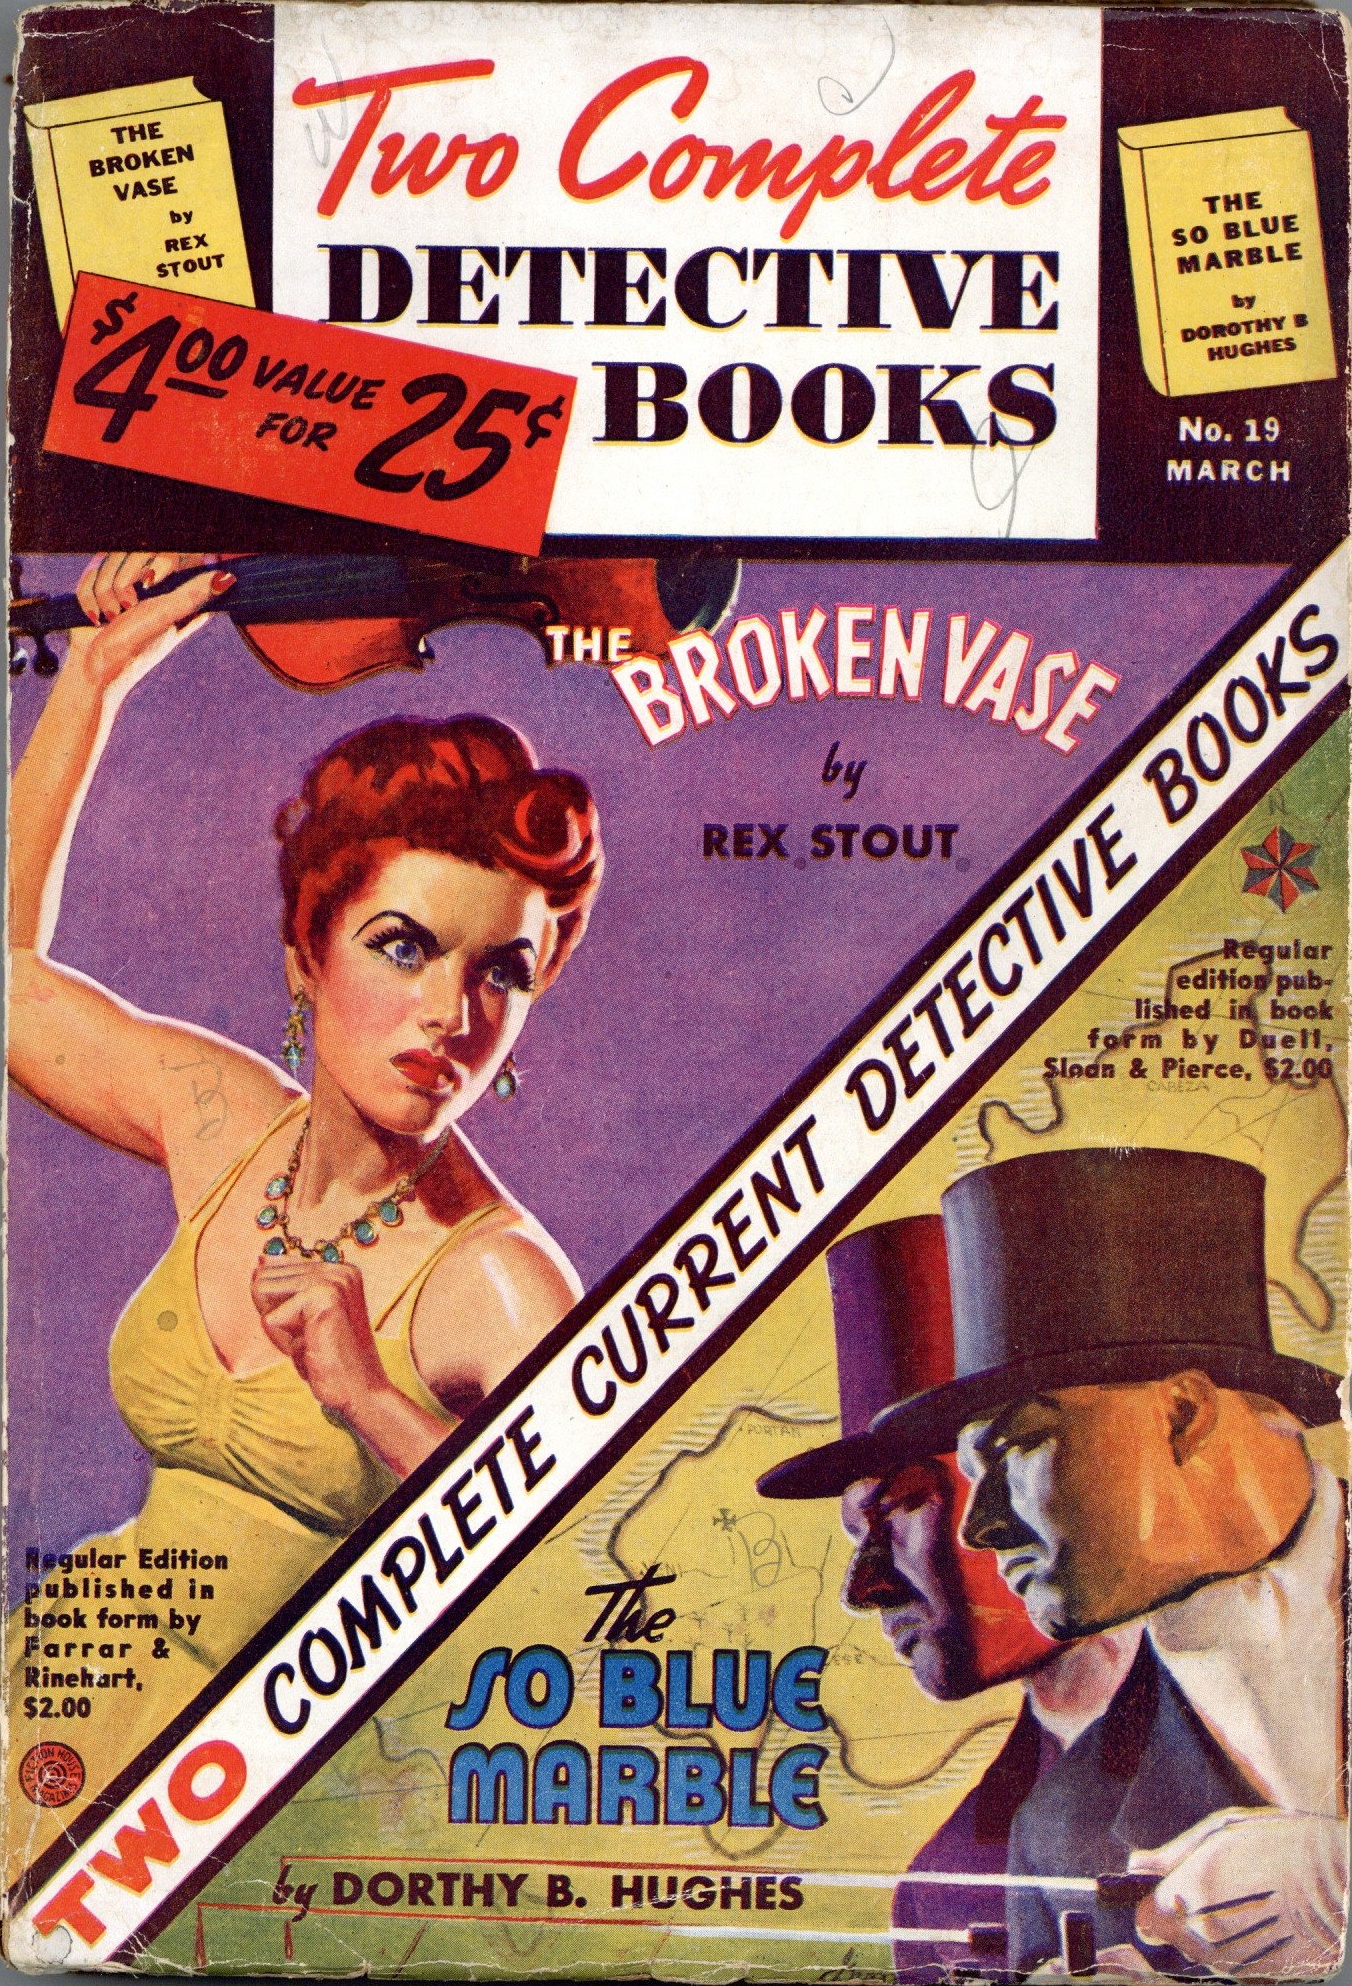 Two Complete Detective Books March 1943